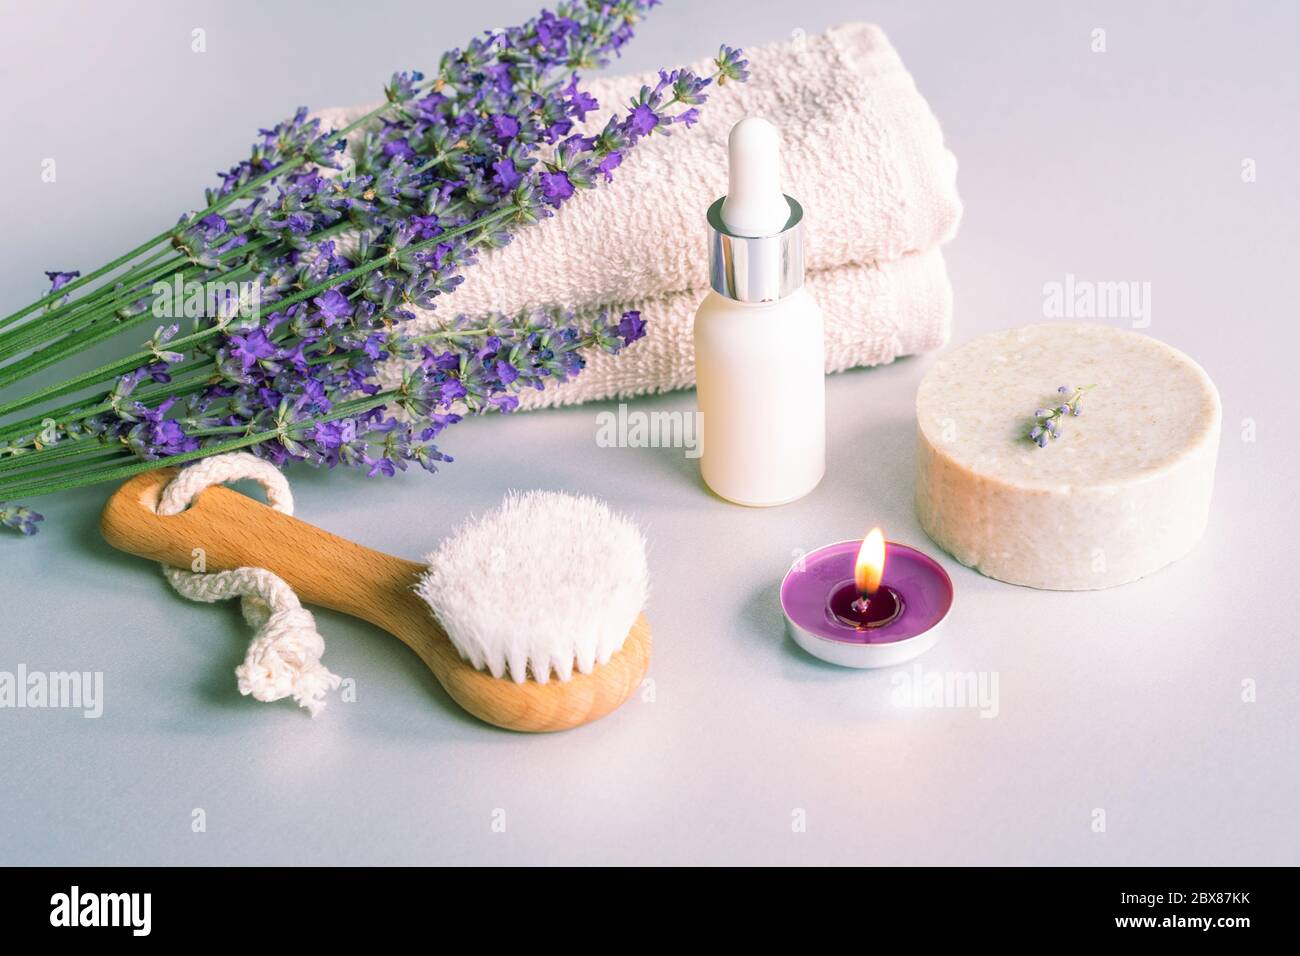 Spa products, soap, face brush and towel, lavender flowers on white background. Stock Photo